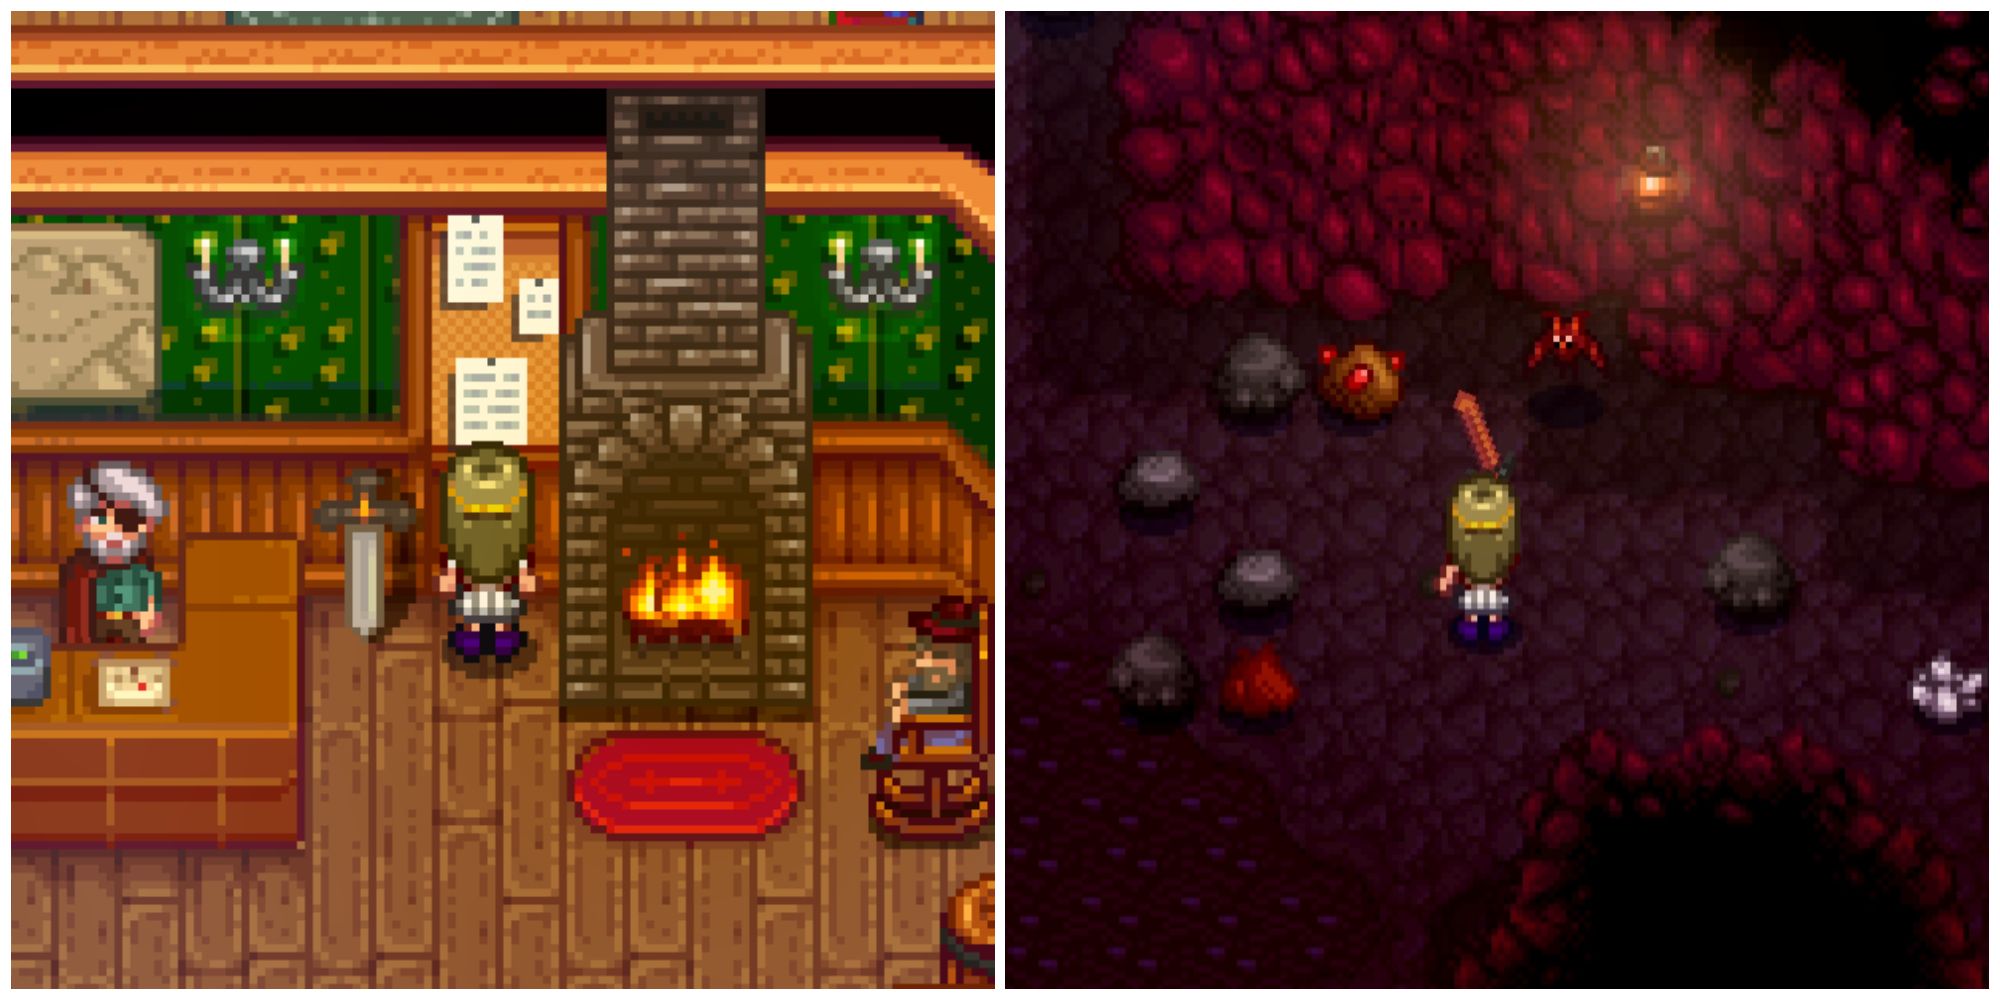 Split image of a character looking at the Monster Eradication Goals bulletin board and a character attacking a bat in Stardew Valley